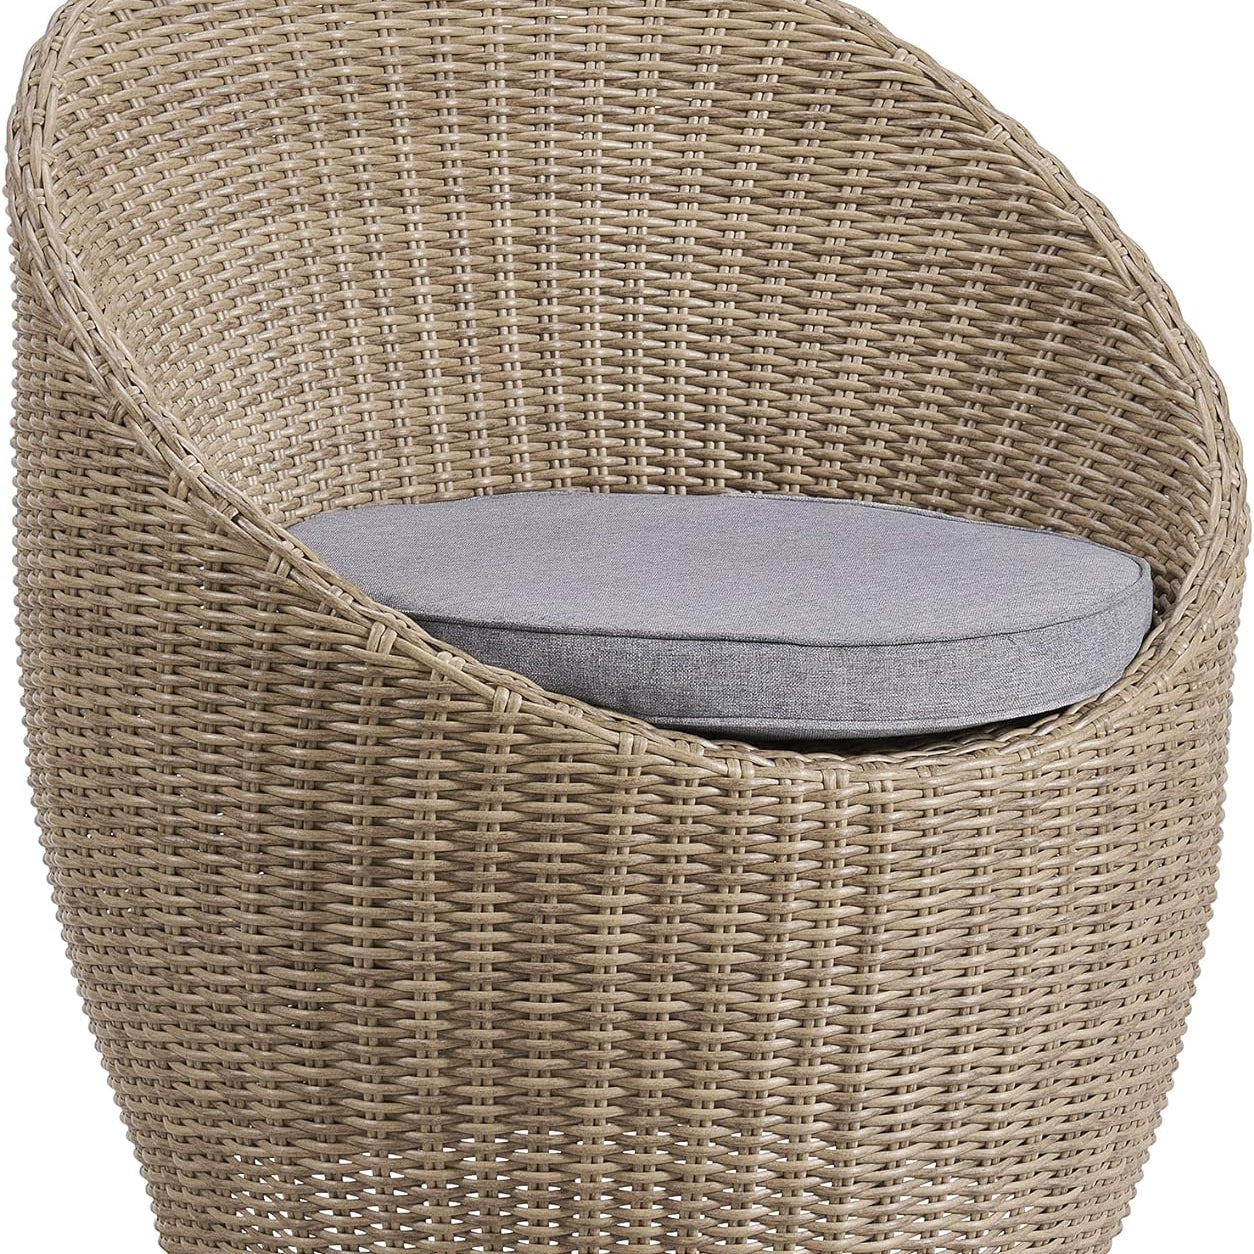 Rattan Brown Strafford All-weather Wicker Outdoor Set with Two Chairs and 18" Cocktail Table - Outdoor Seating